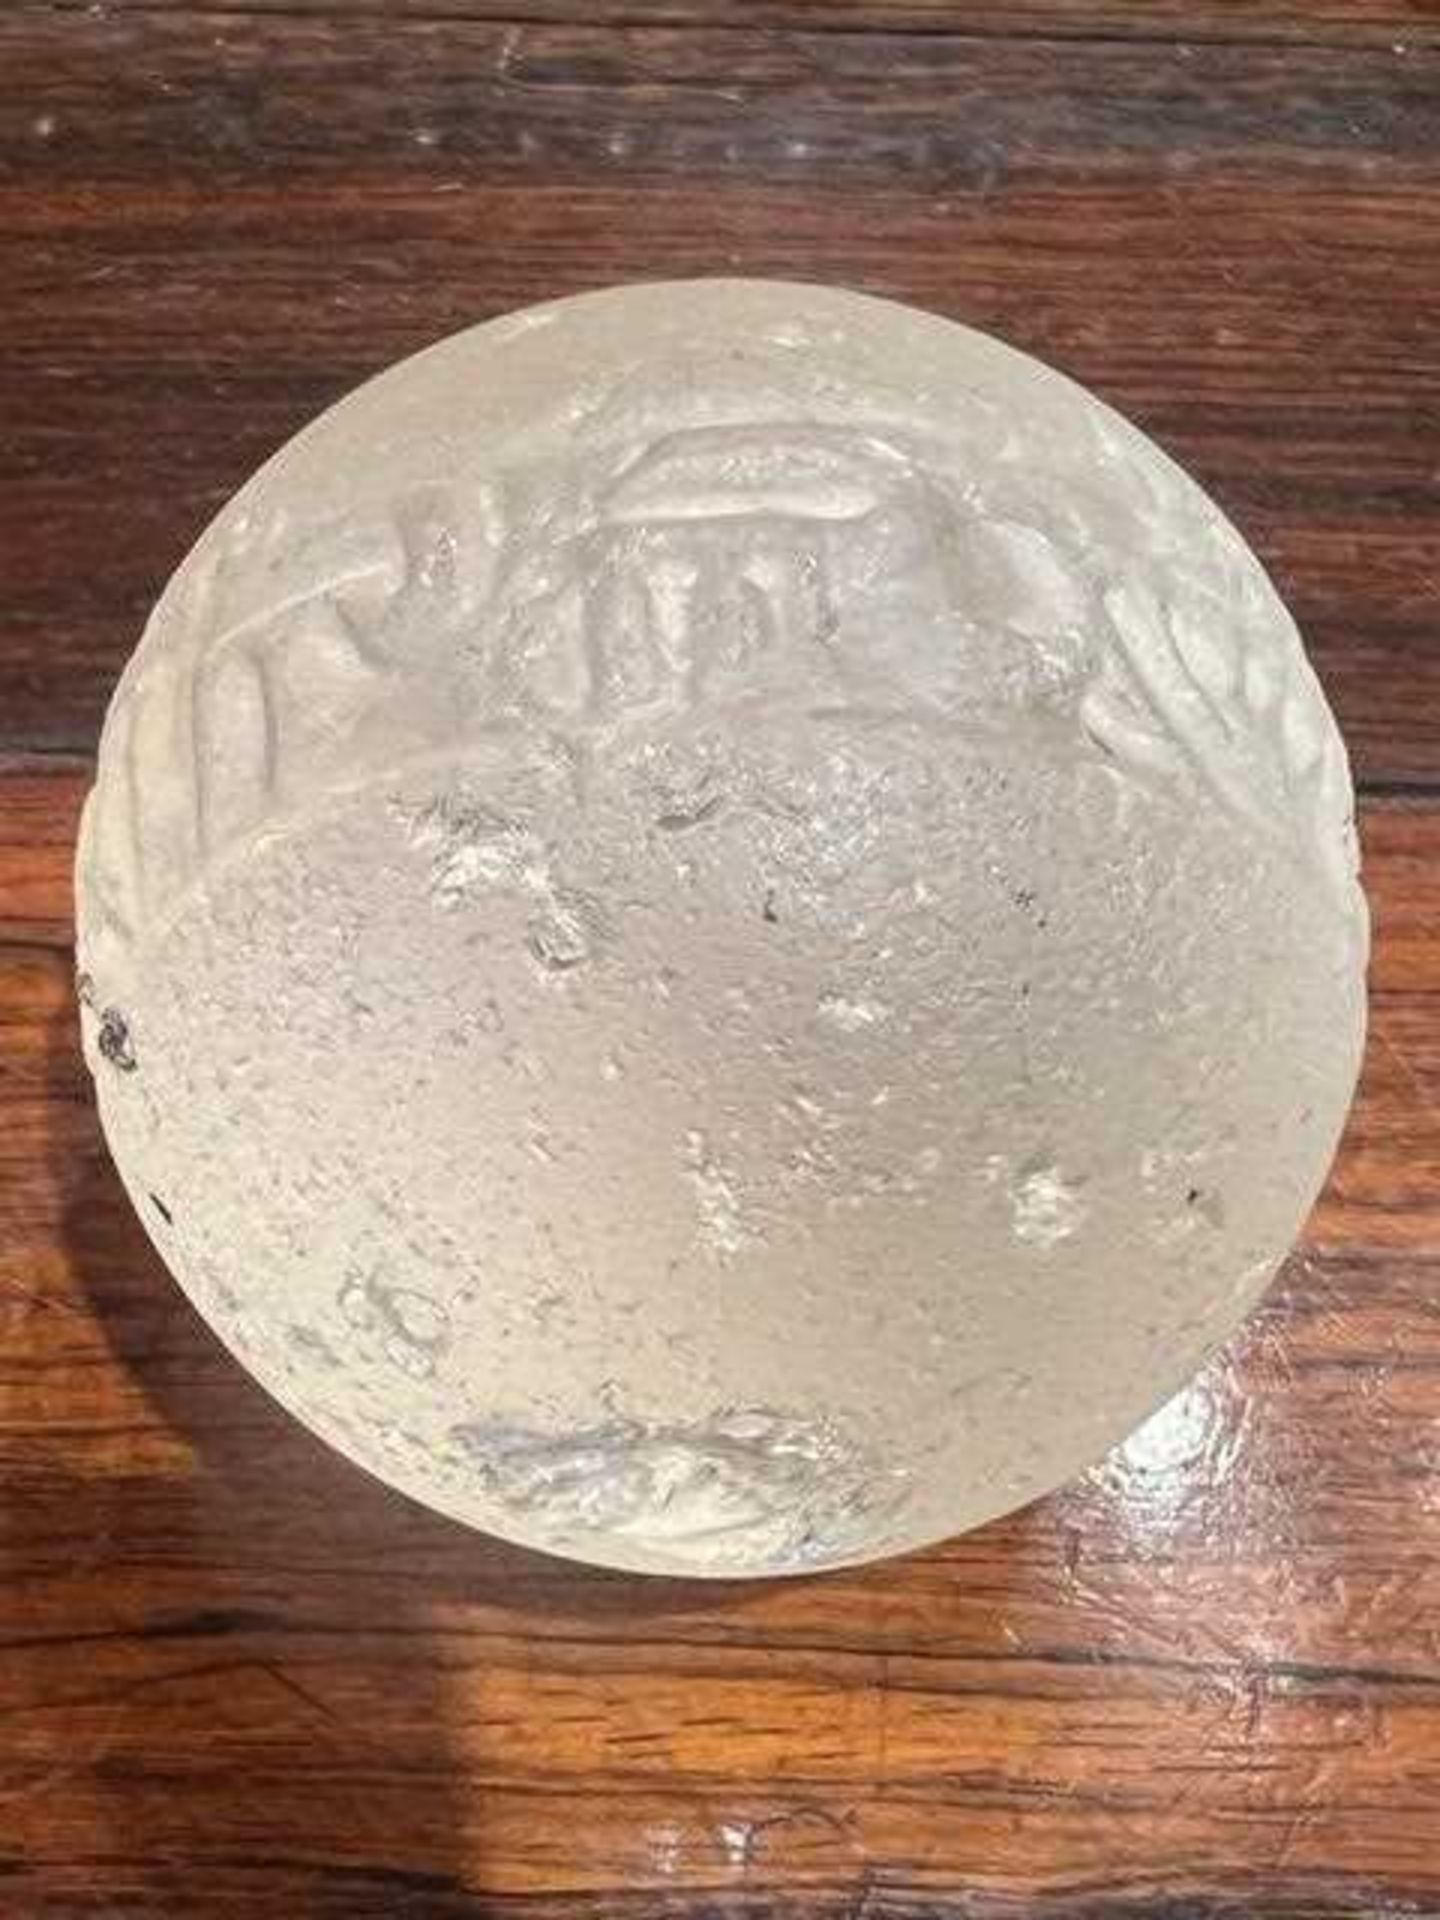 AN ISLAMIC SOLID GLASS SPHERE - Image 6 of 15